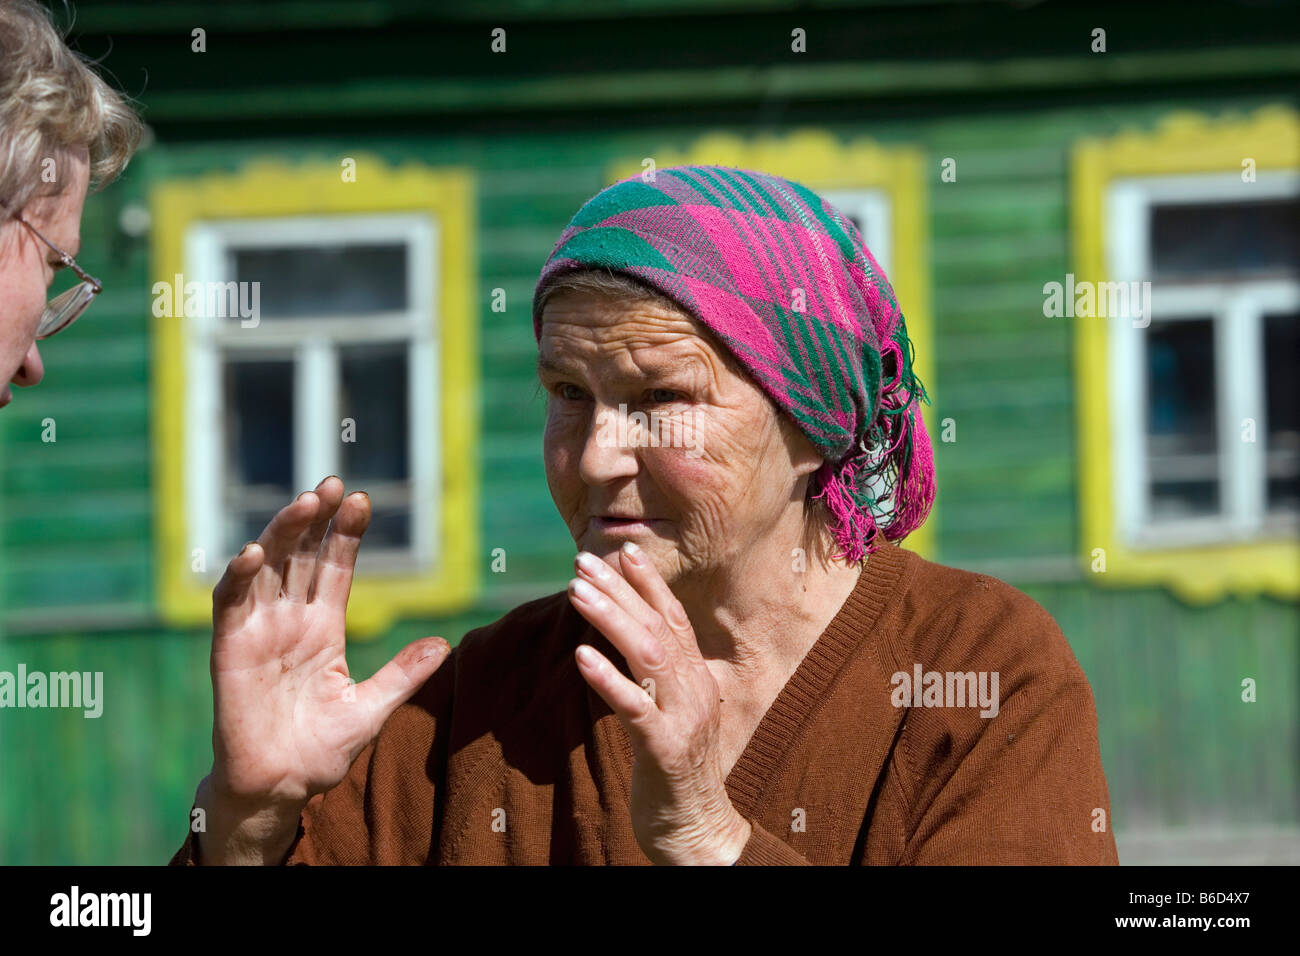 Russia, Tver, Old woman at countryside, Portrait. Stock Photo